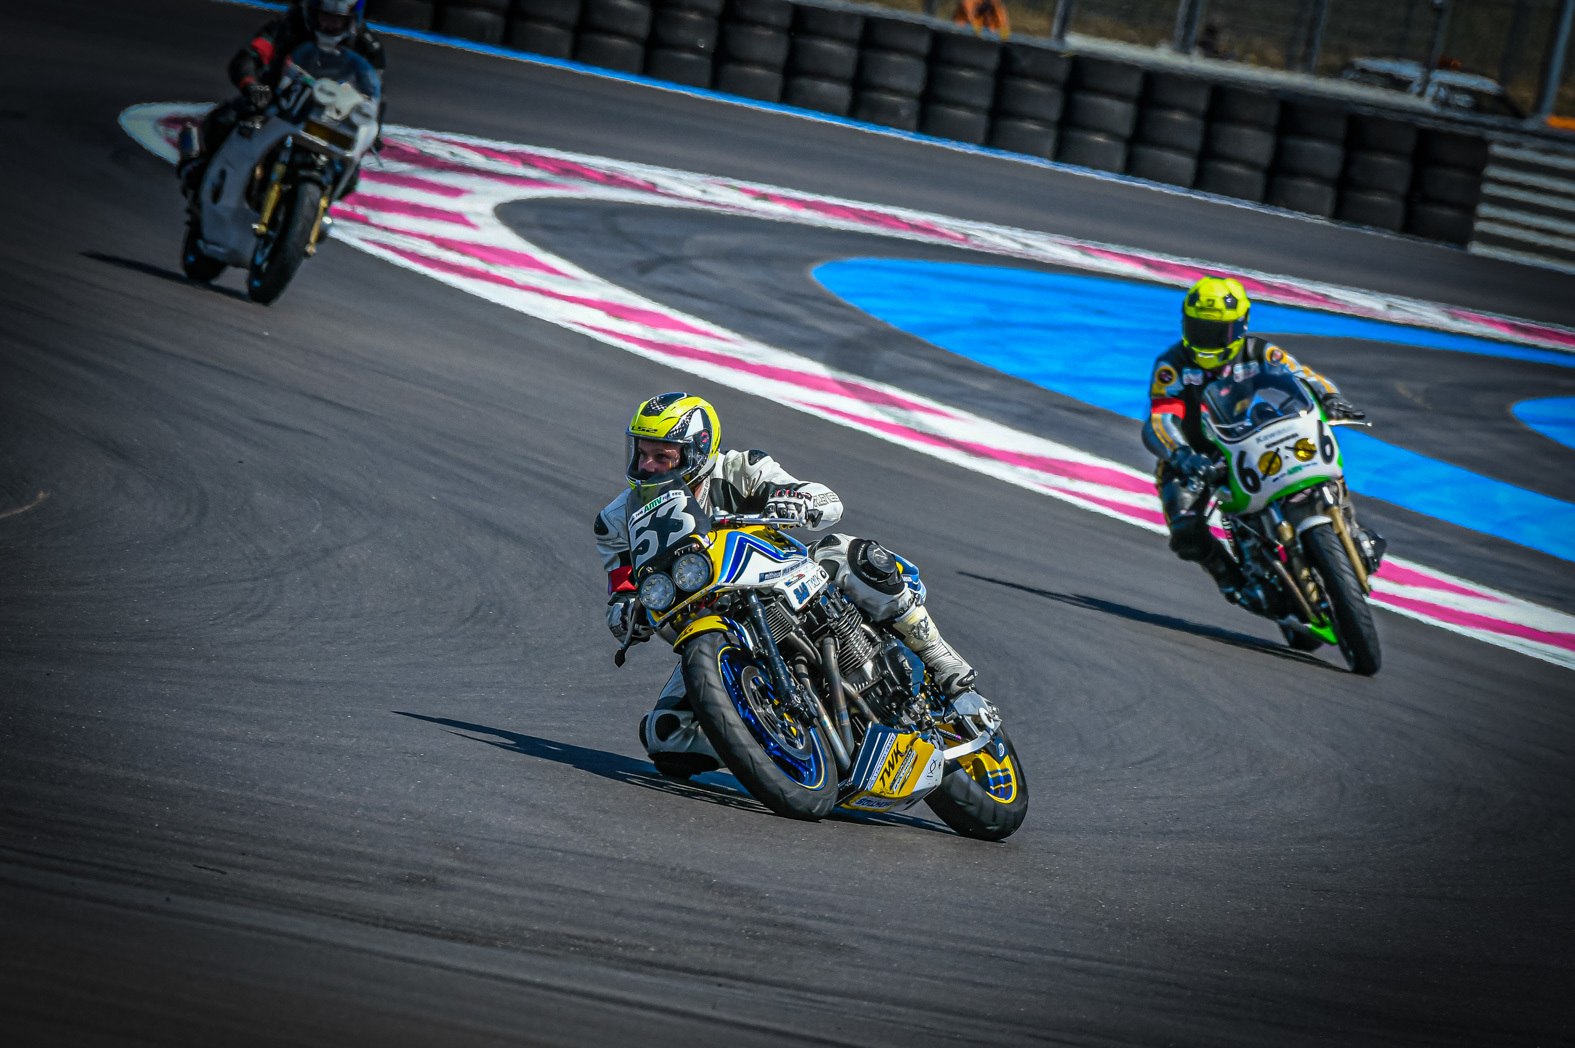 Read details about the race events planned as part of the European Endurance Legends Cup - EELC.eu